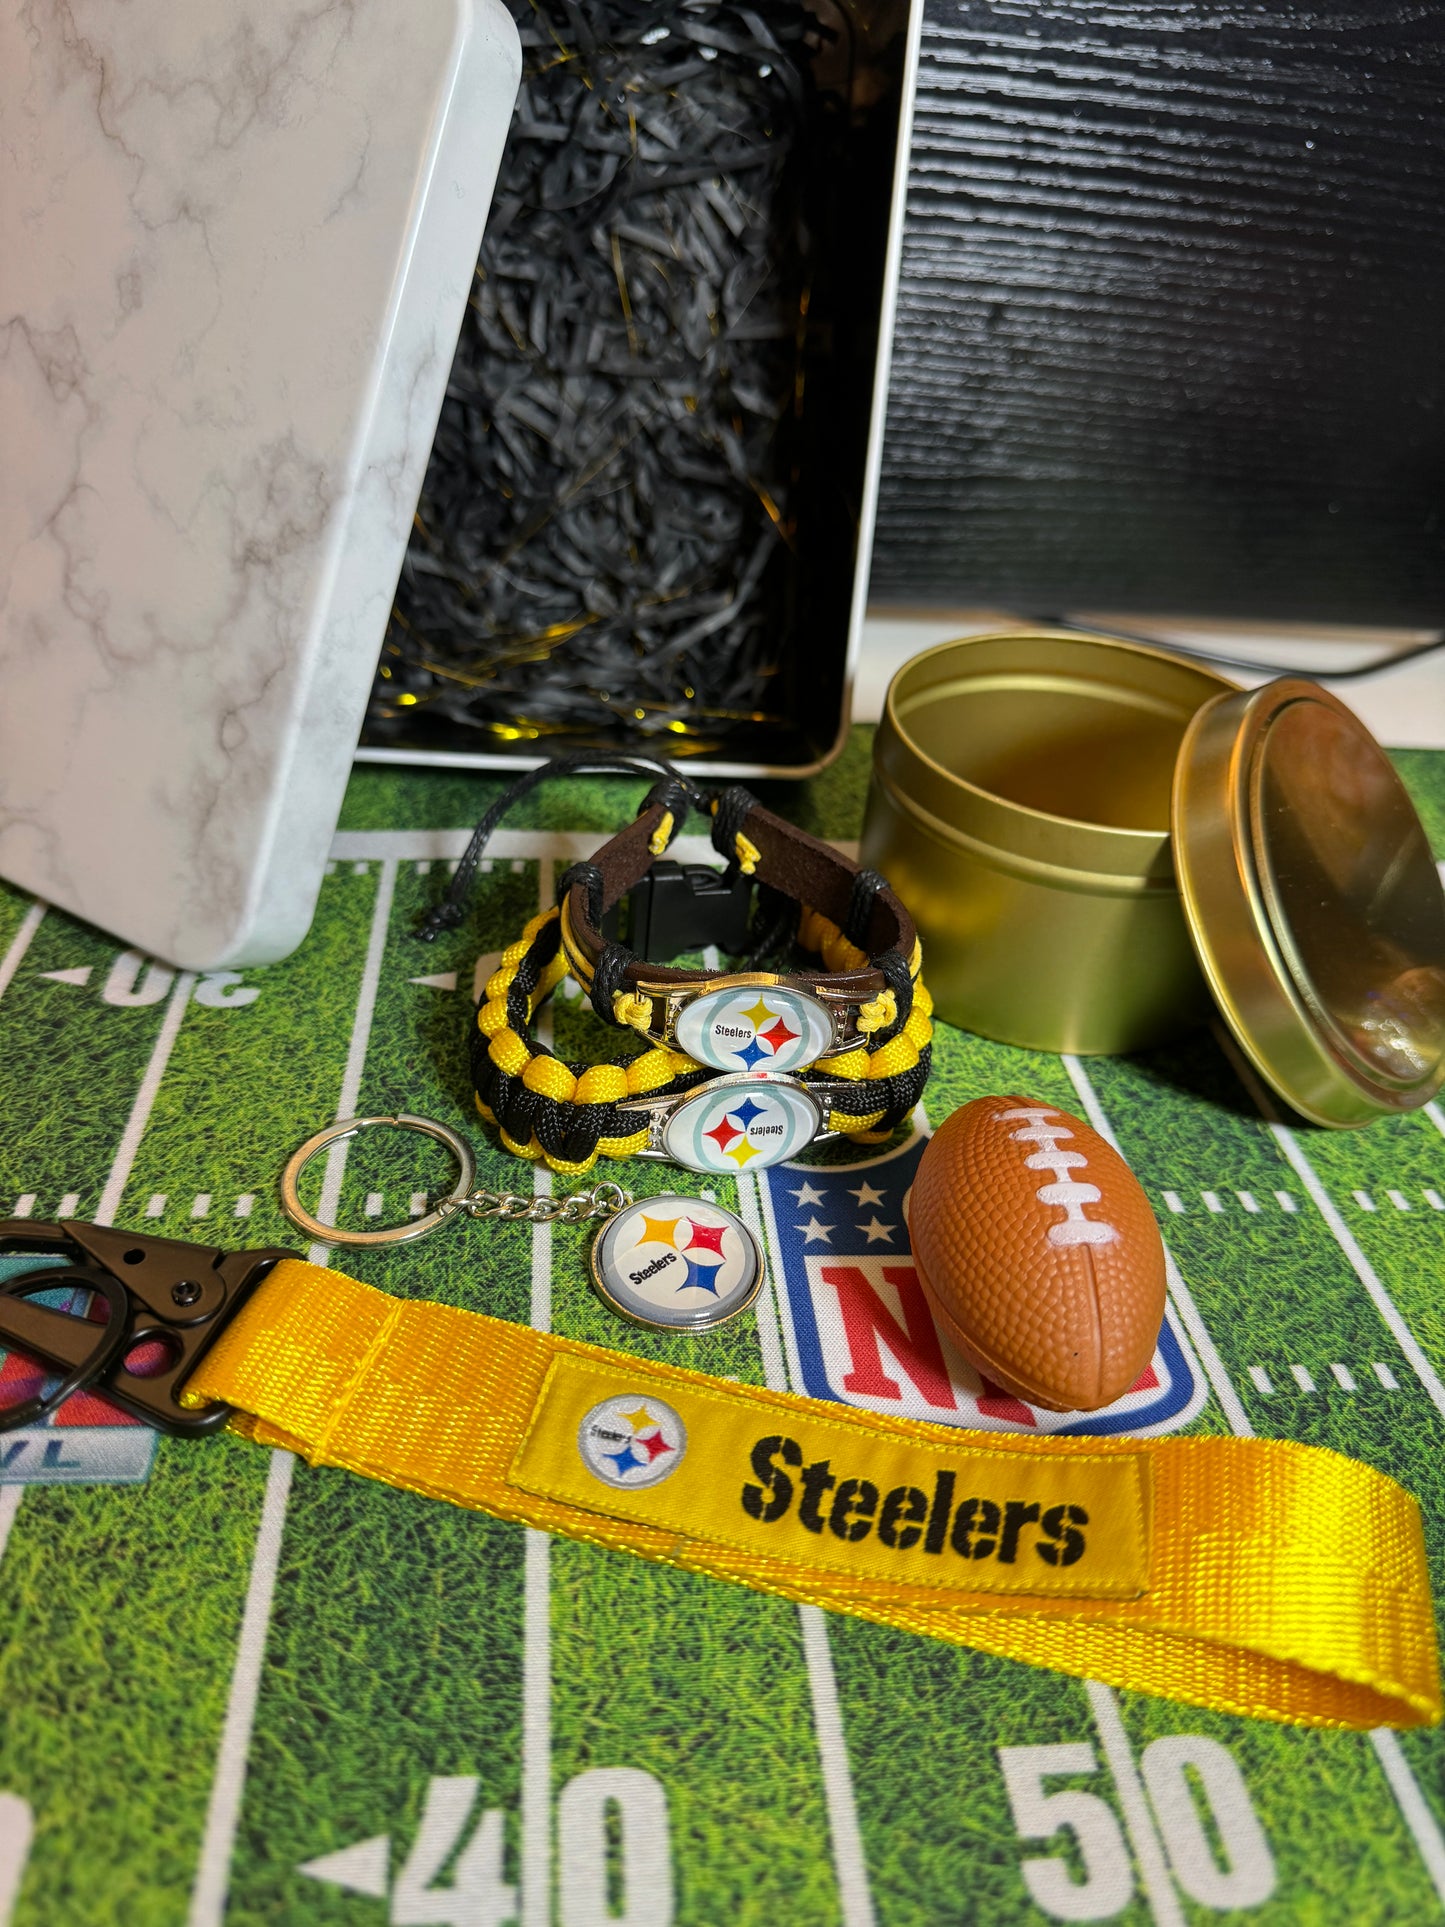 Steelers Gift Box（10% off your order！！！）